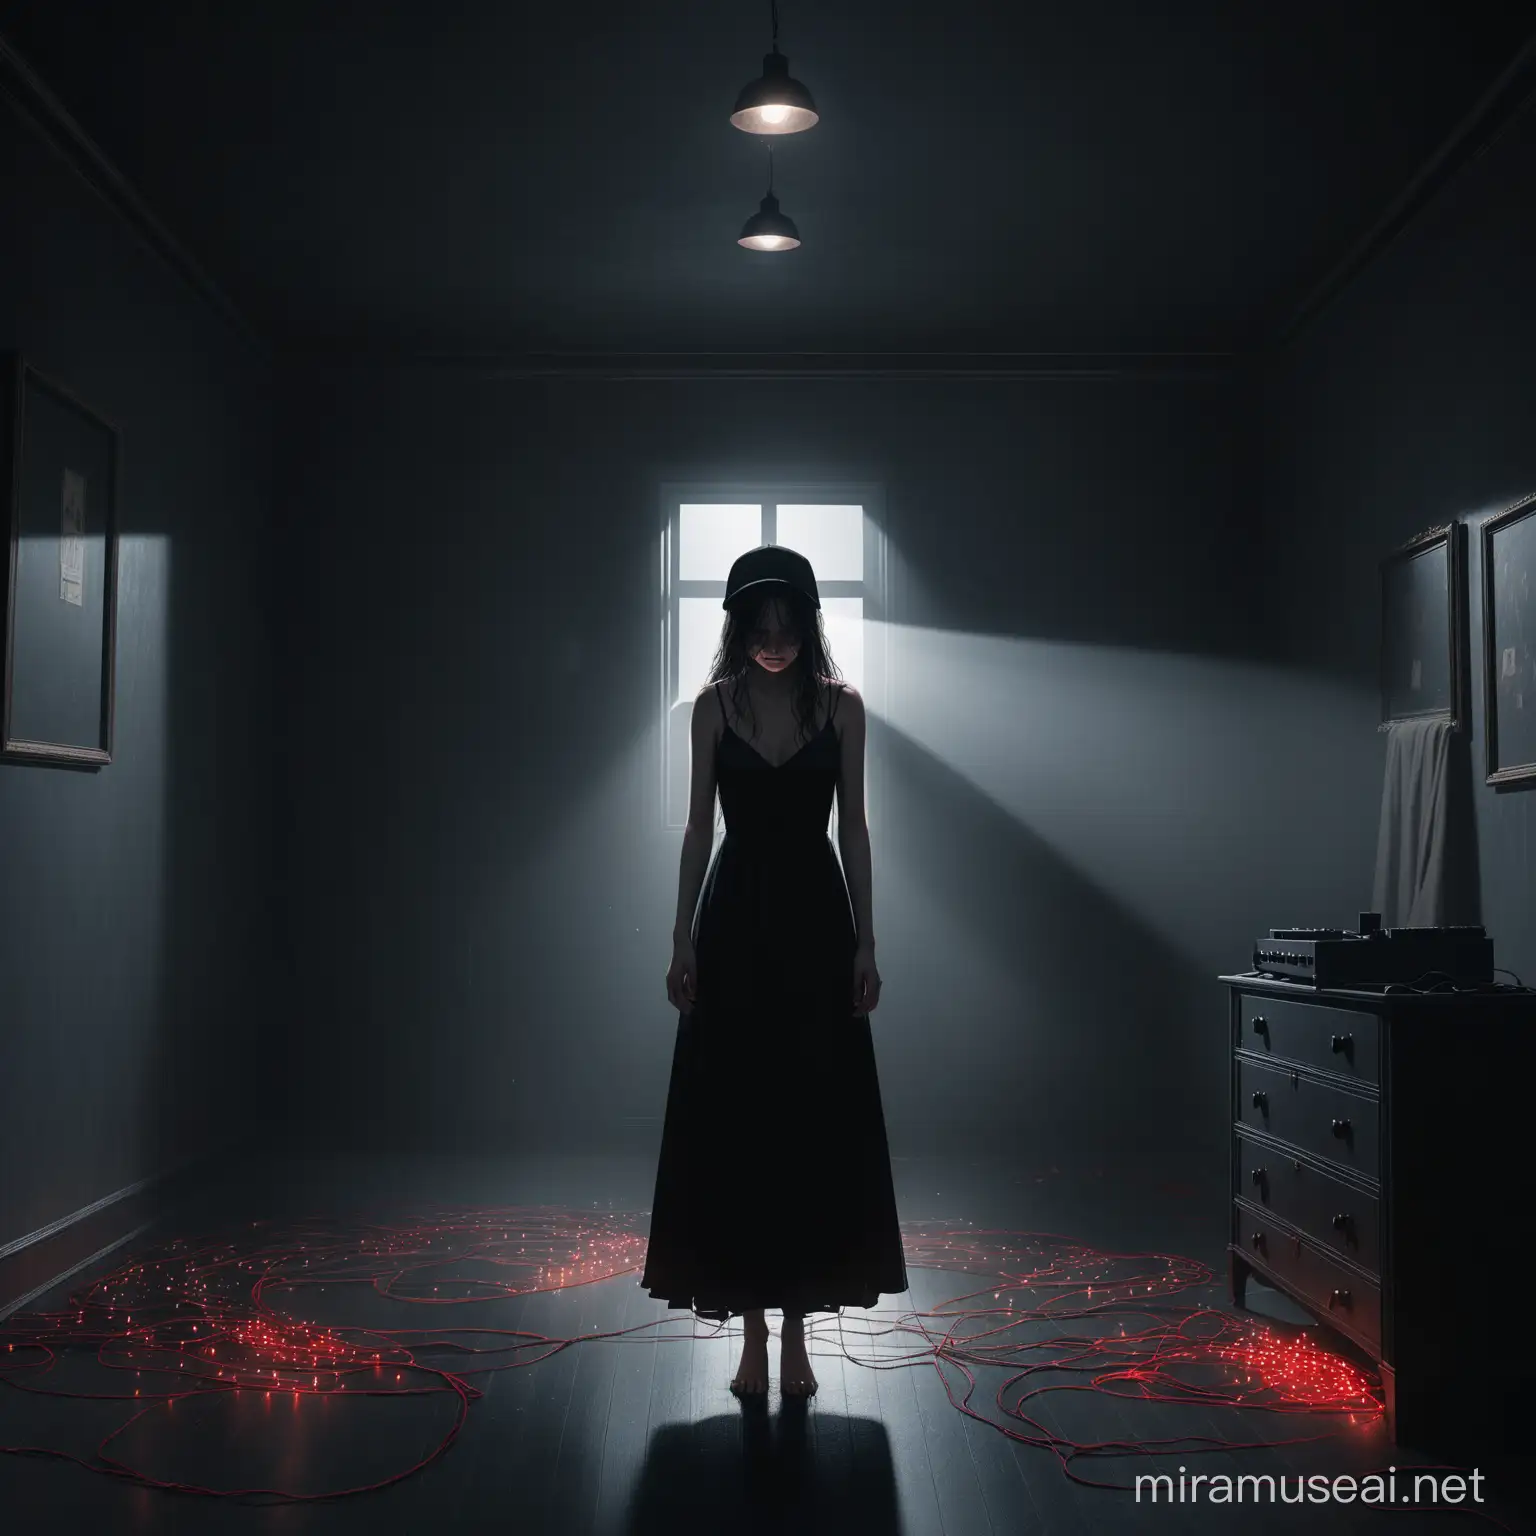 Girl, crying, masterful man, a little far, tall style, head down, middle of the picture, long black dress, black cap, room a little messy, red thread lights, ghost hands attacking the girl, sad, inside the room,  Gray room, professional lighting, cinematic, many details, high quality, realistic, music cover